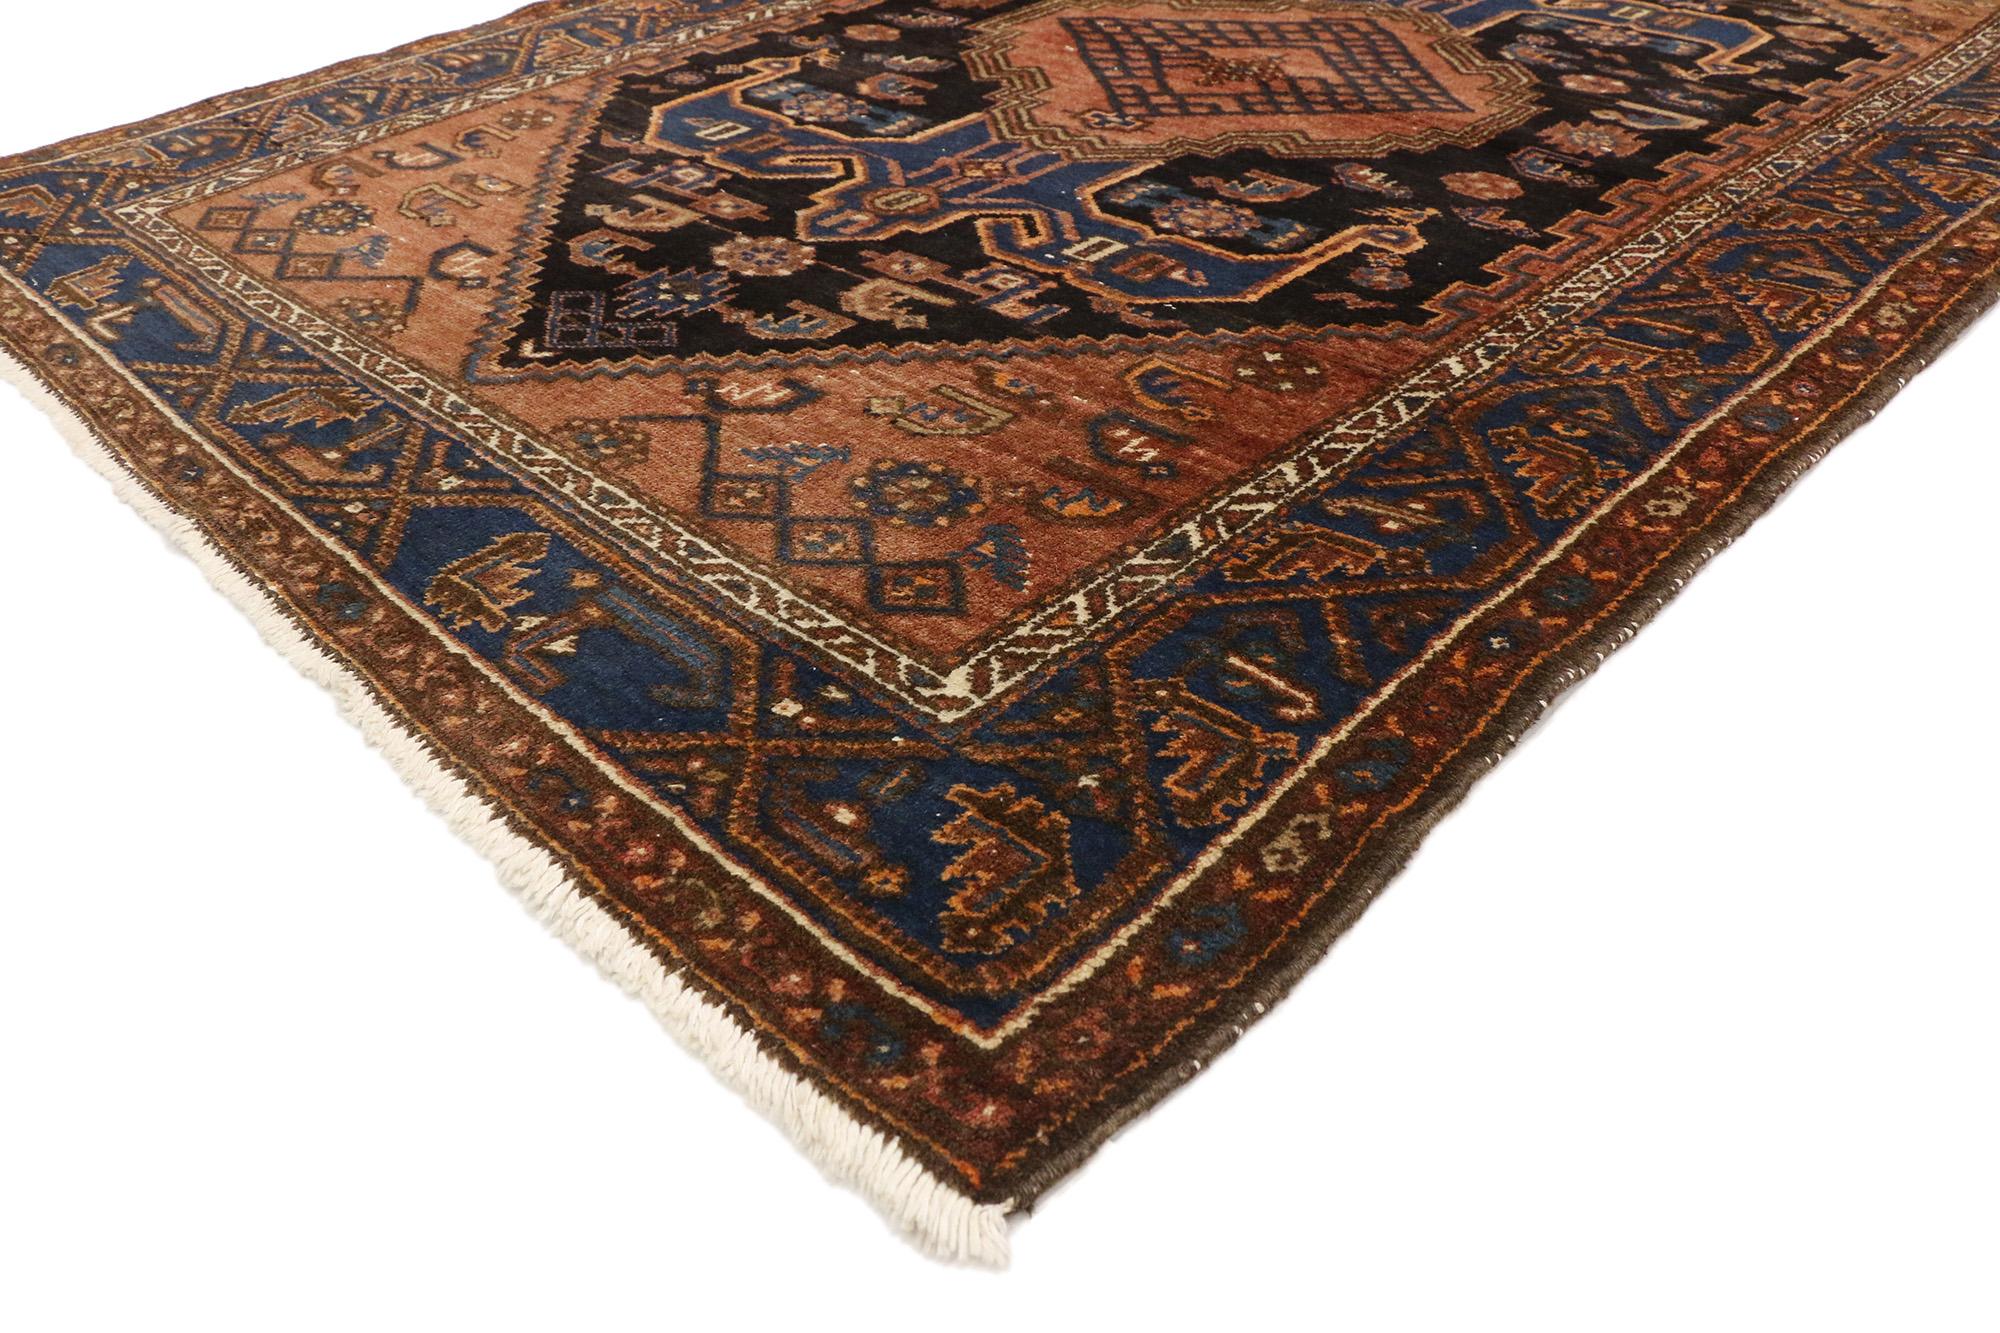 20444 Antique Persian Nahavand Hamadan Rug, 05'00 x 06'04. Step into the enchanting allure of this antique Persian Nahavand Hamadan rug, where charisma meets stately presence in a captivating dance of modern tribal elegance. This extraordinary rug